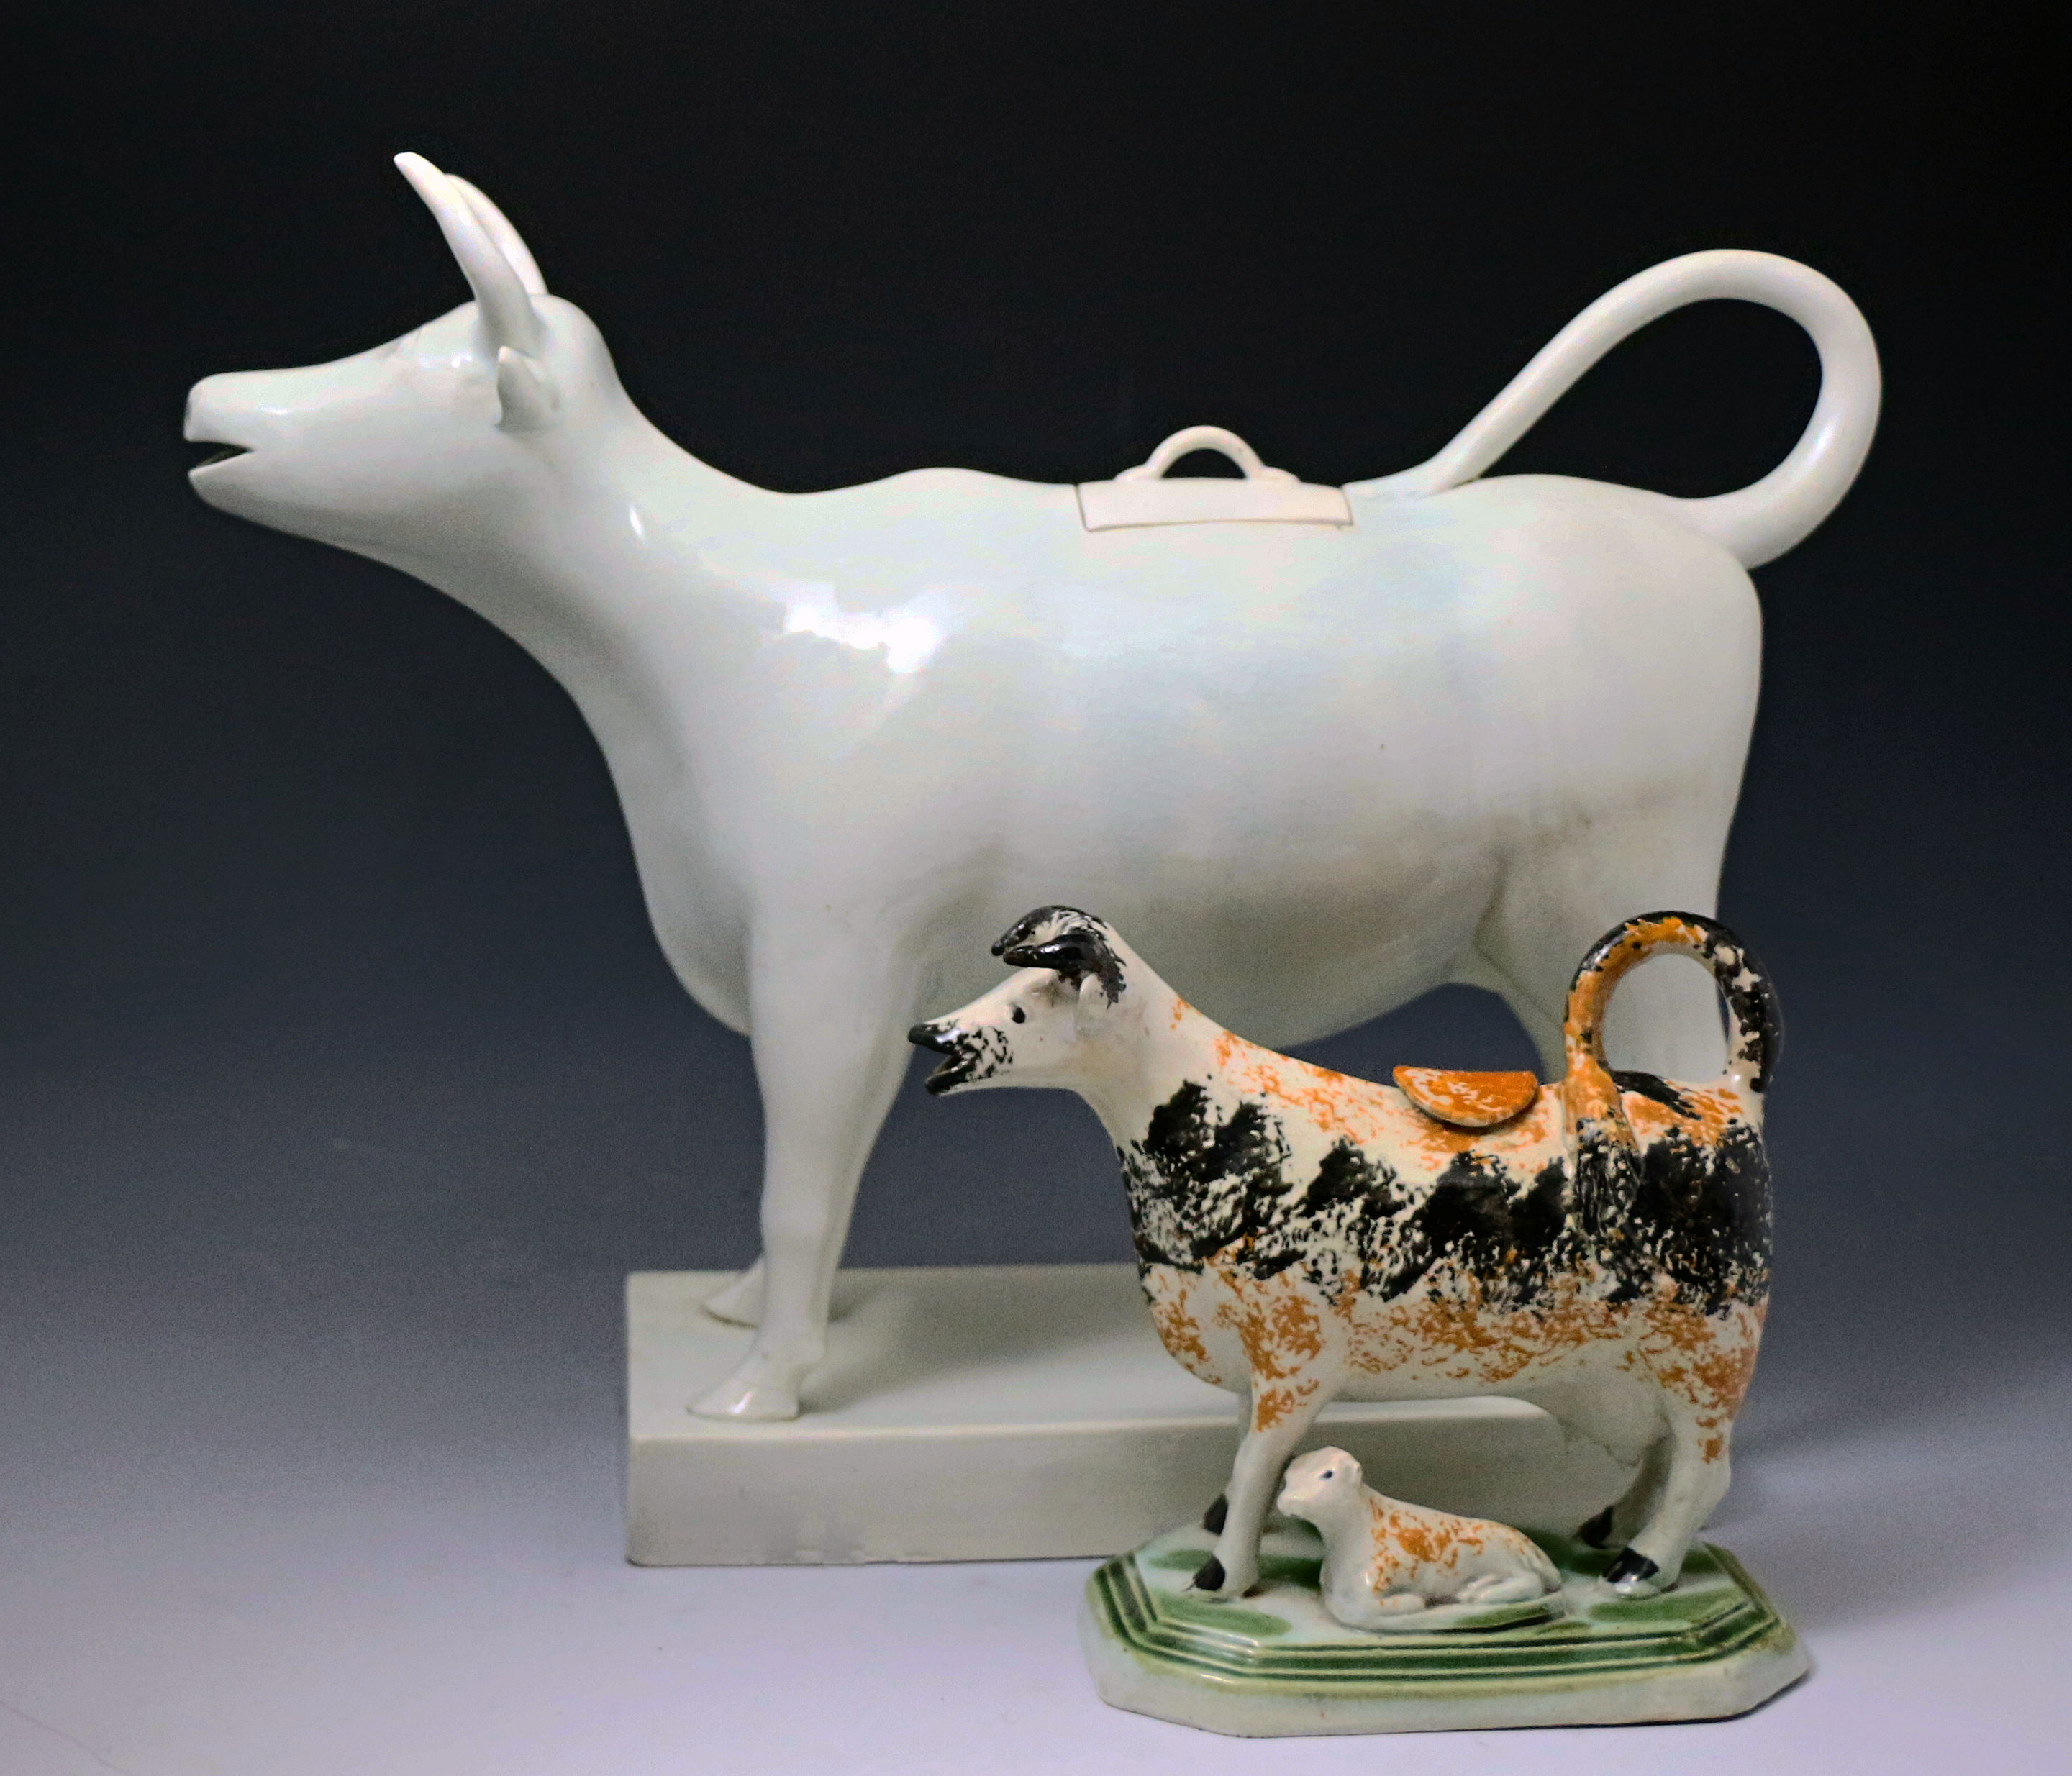 Massive scale early cow creamer pottery figure , pearlware late 18th century Staffordshire.